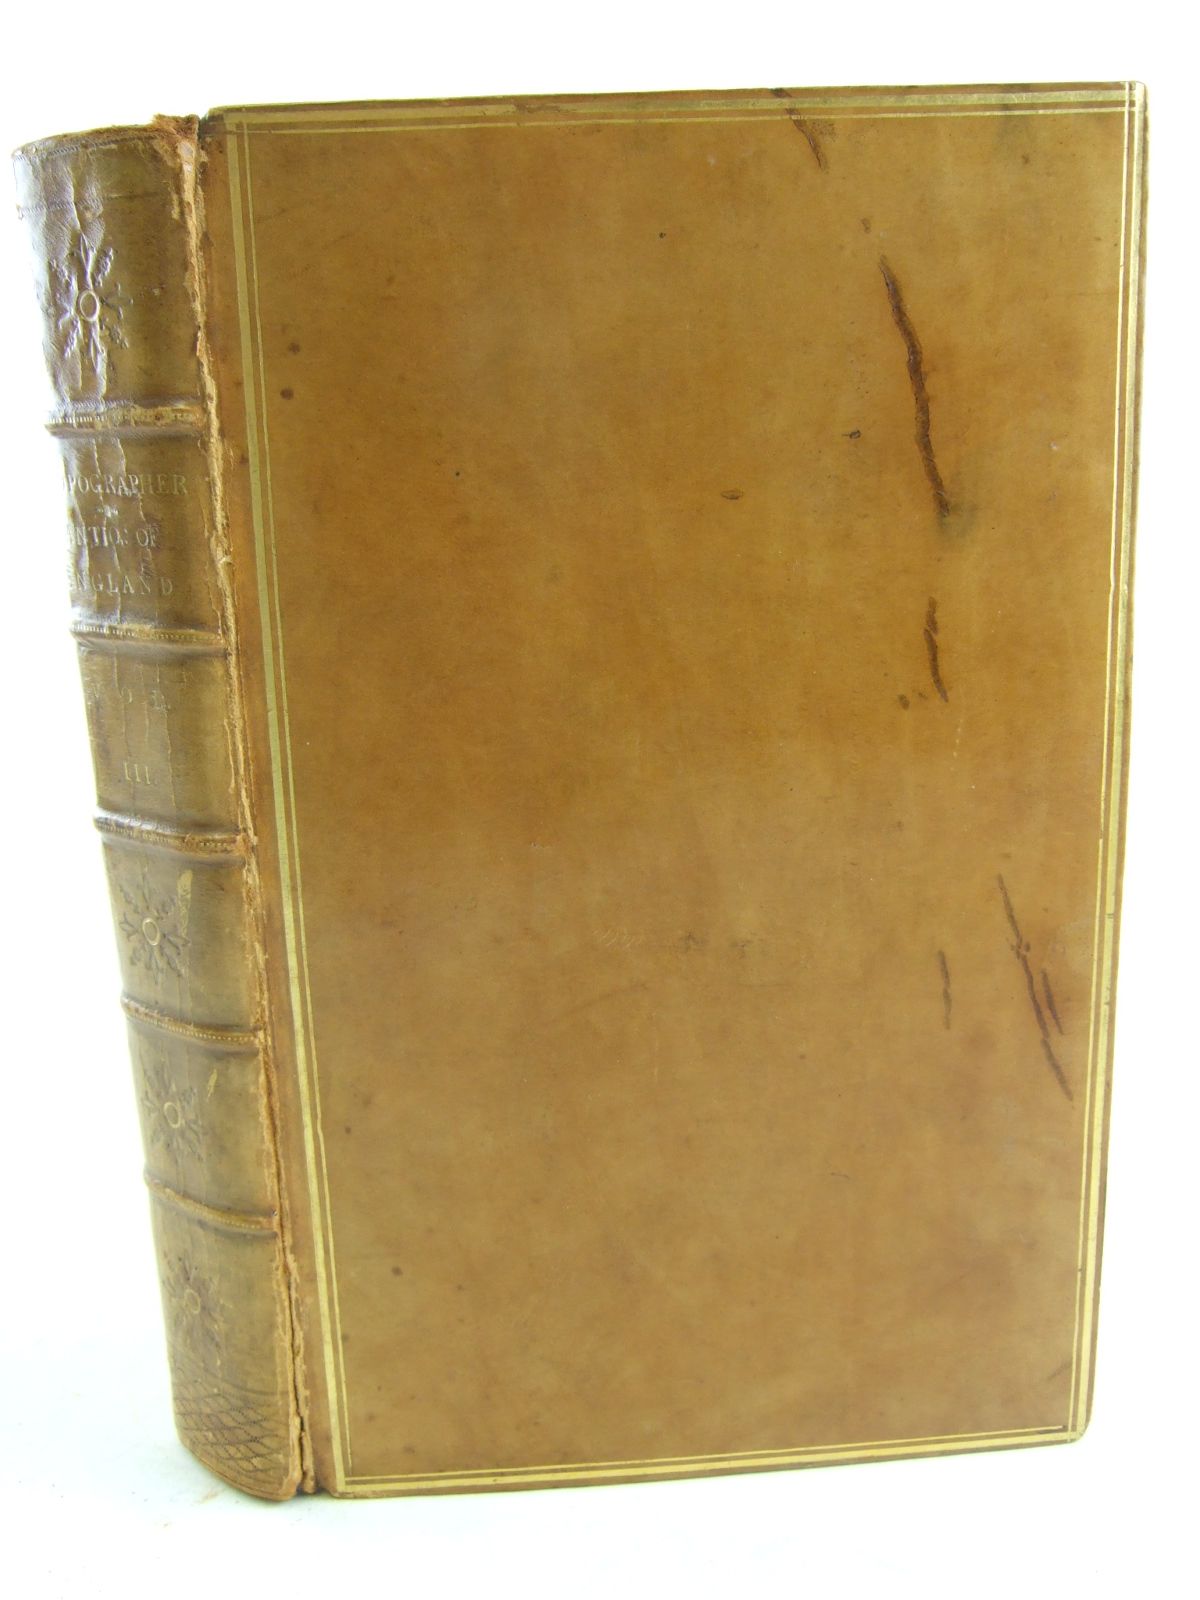 Photo of THE TOPOGRAPHER FOR THE YEAR 1790 VOLUME III published by Robson And Clarke, J. Walker, C. Stalker (STOCK CODE: 1806600)  for sale by Stella & Rose's Books